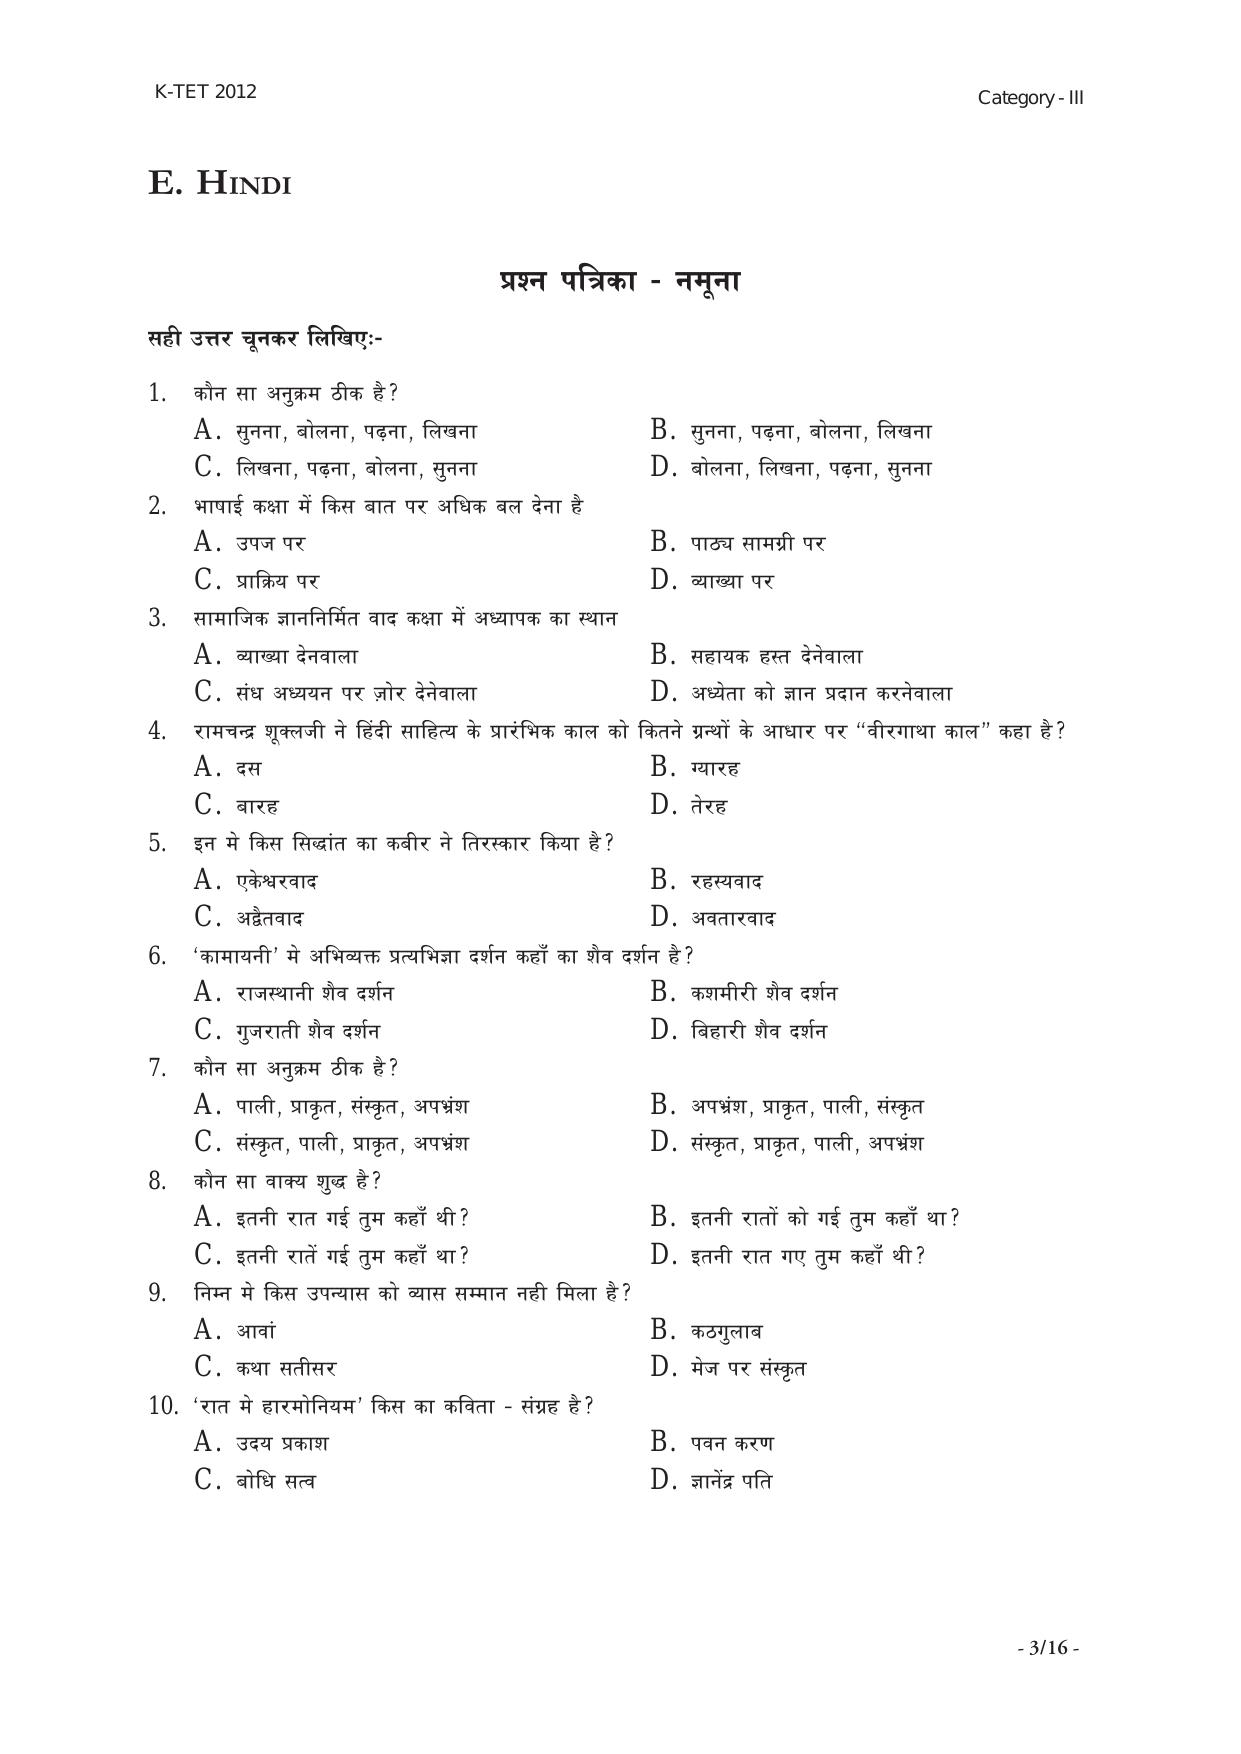 KTET Category III High School Teacher (8 to 10) Exam Previous Papers - Page 16